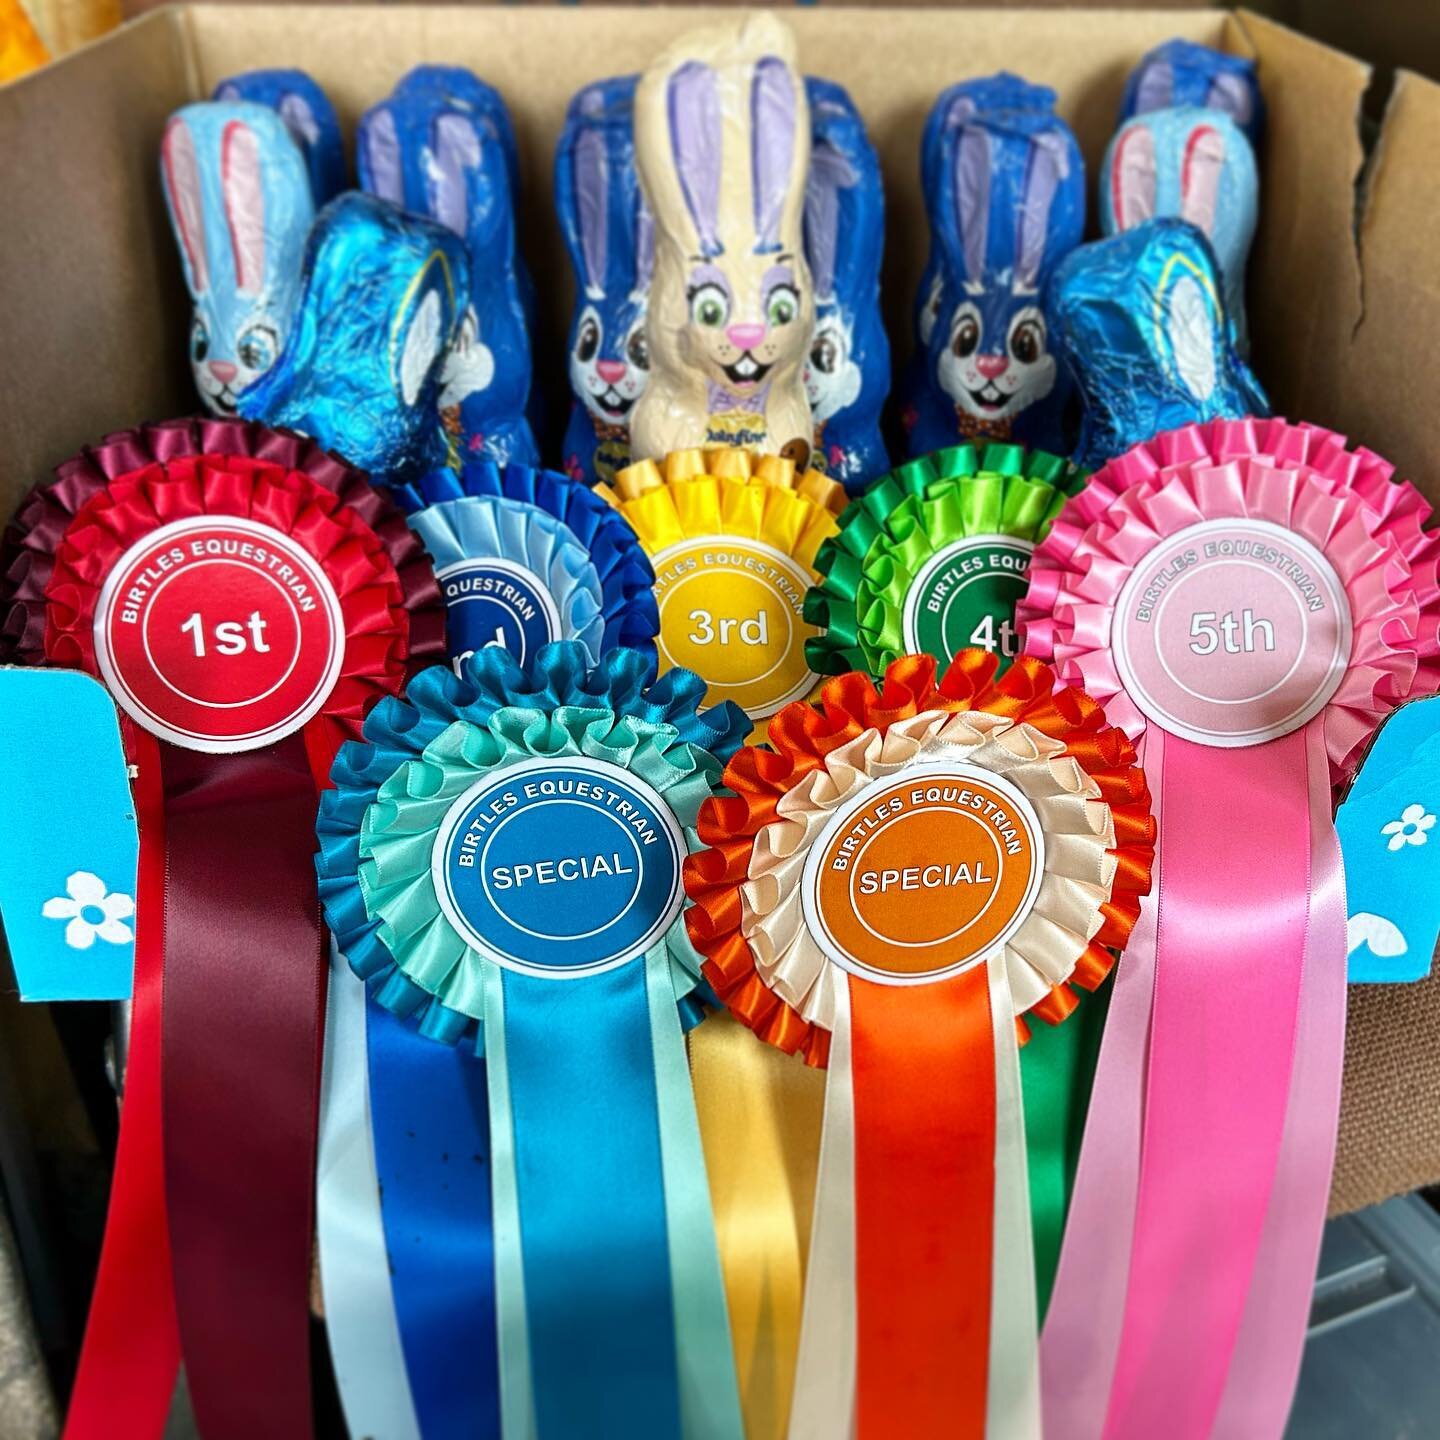 Everyone did fantastic today on the final Easter Pony Day! Hope you all had fun, see you all back in your lessons!🐣🥚🪺🎉 #horses#horse#pony#ponies#ponyday#horseriding#birtlesequestrian#ridingwithhorsemanship